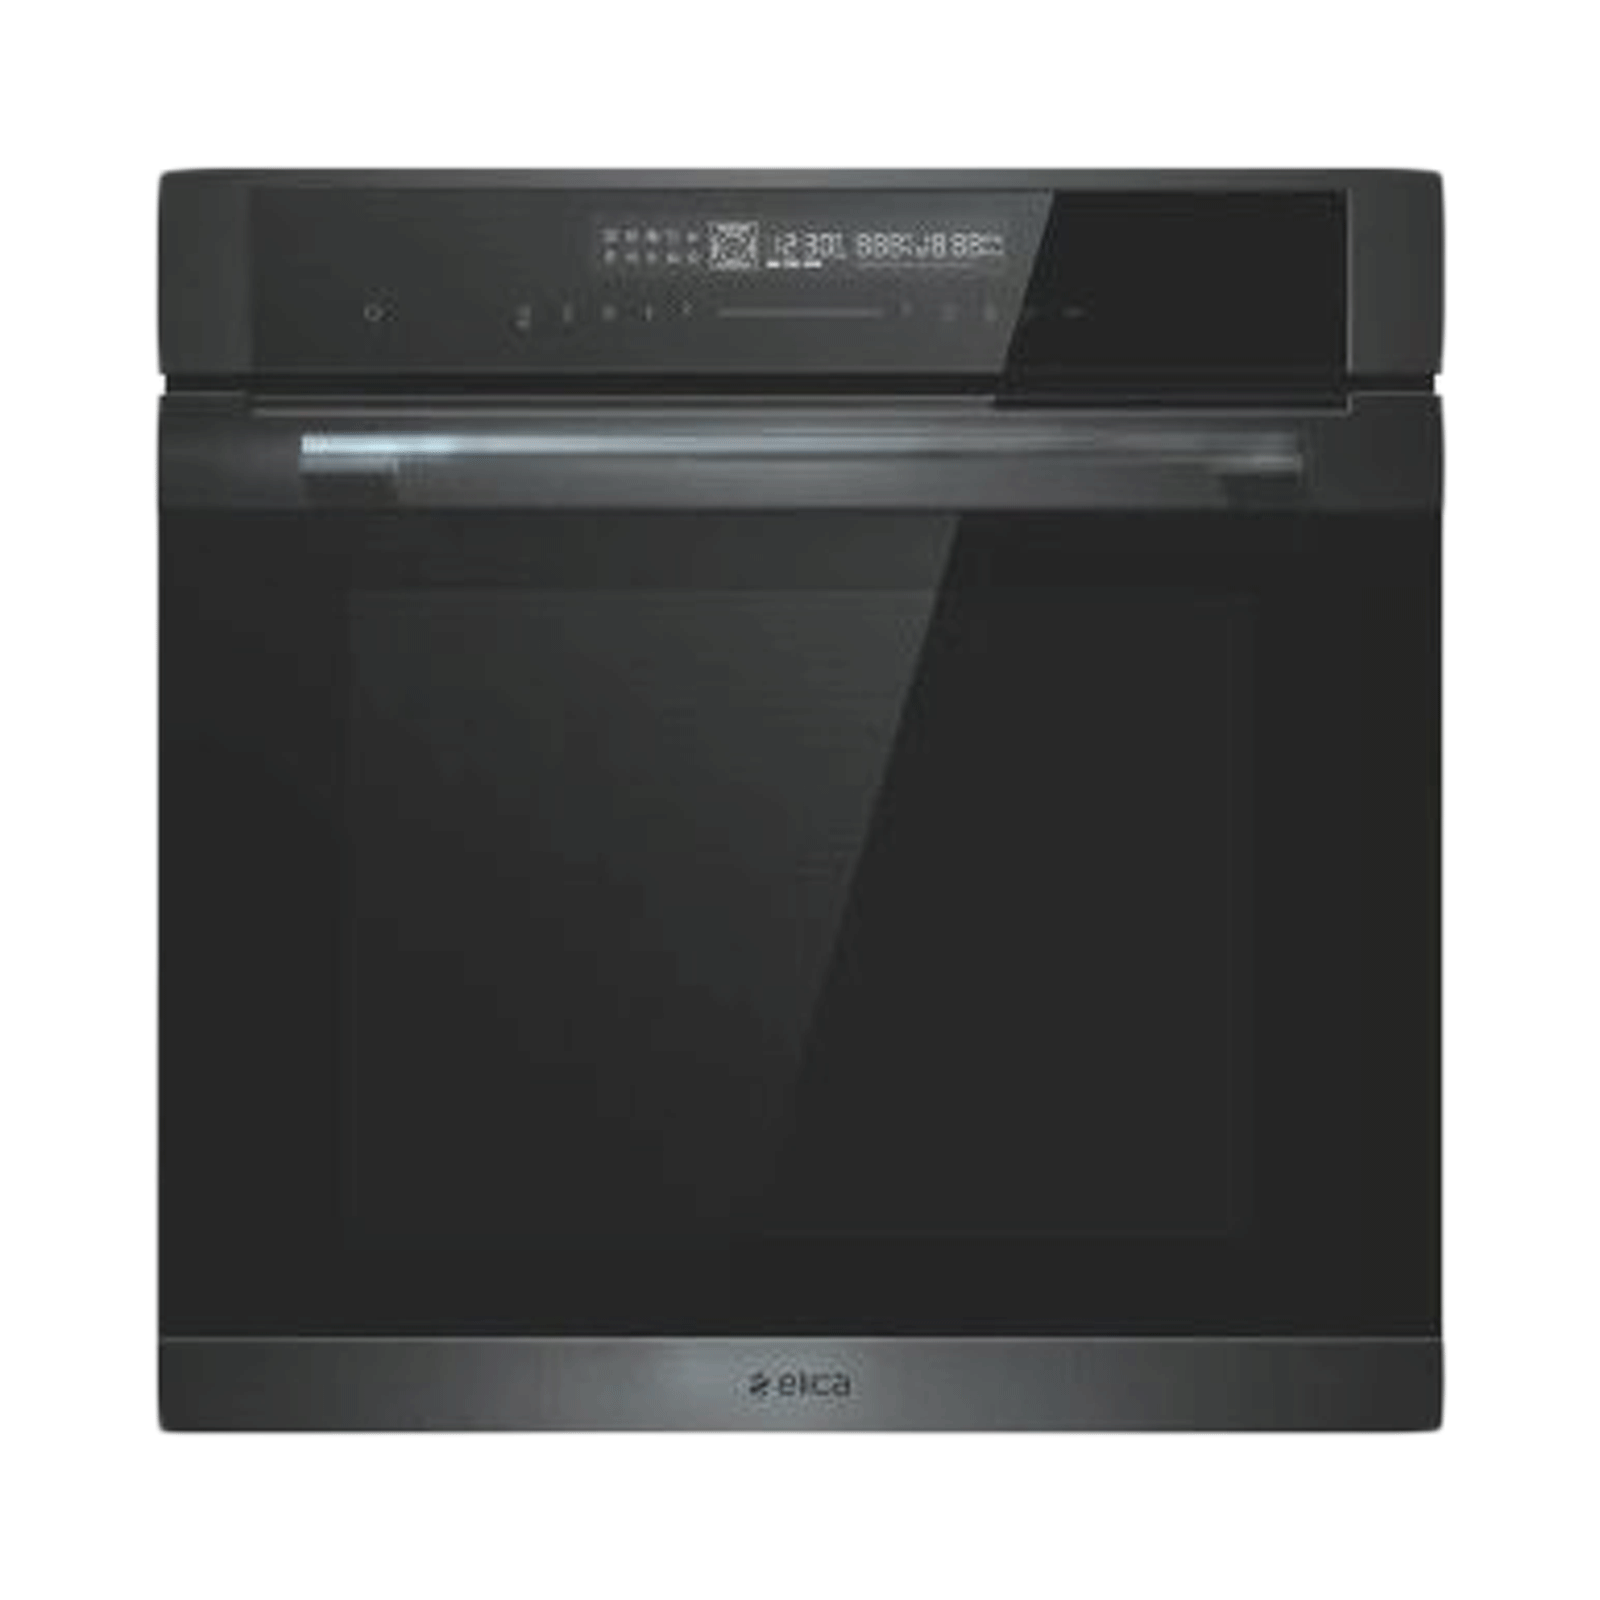 Elica EPBI Inox Nero 1164 71 Litres Built-in Oven (Touch Control With LED Display, Black)_1